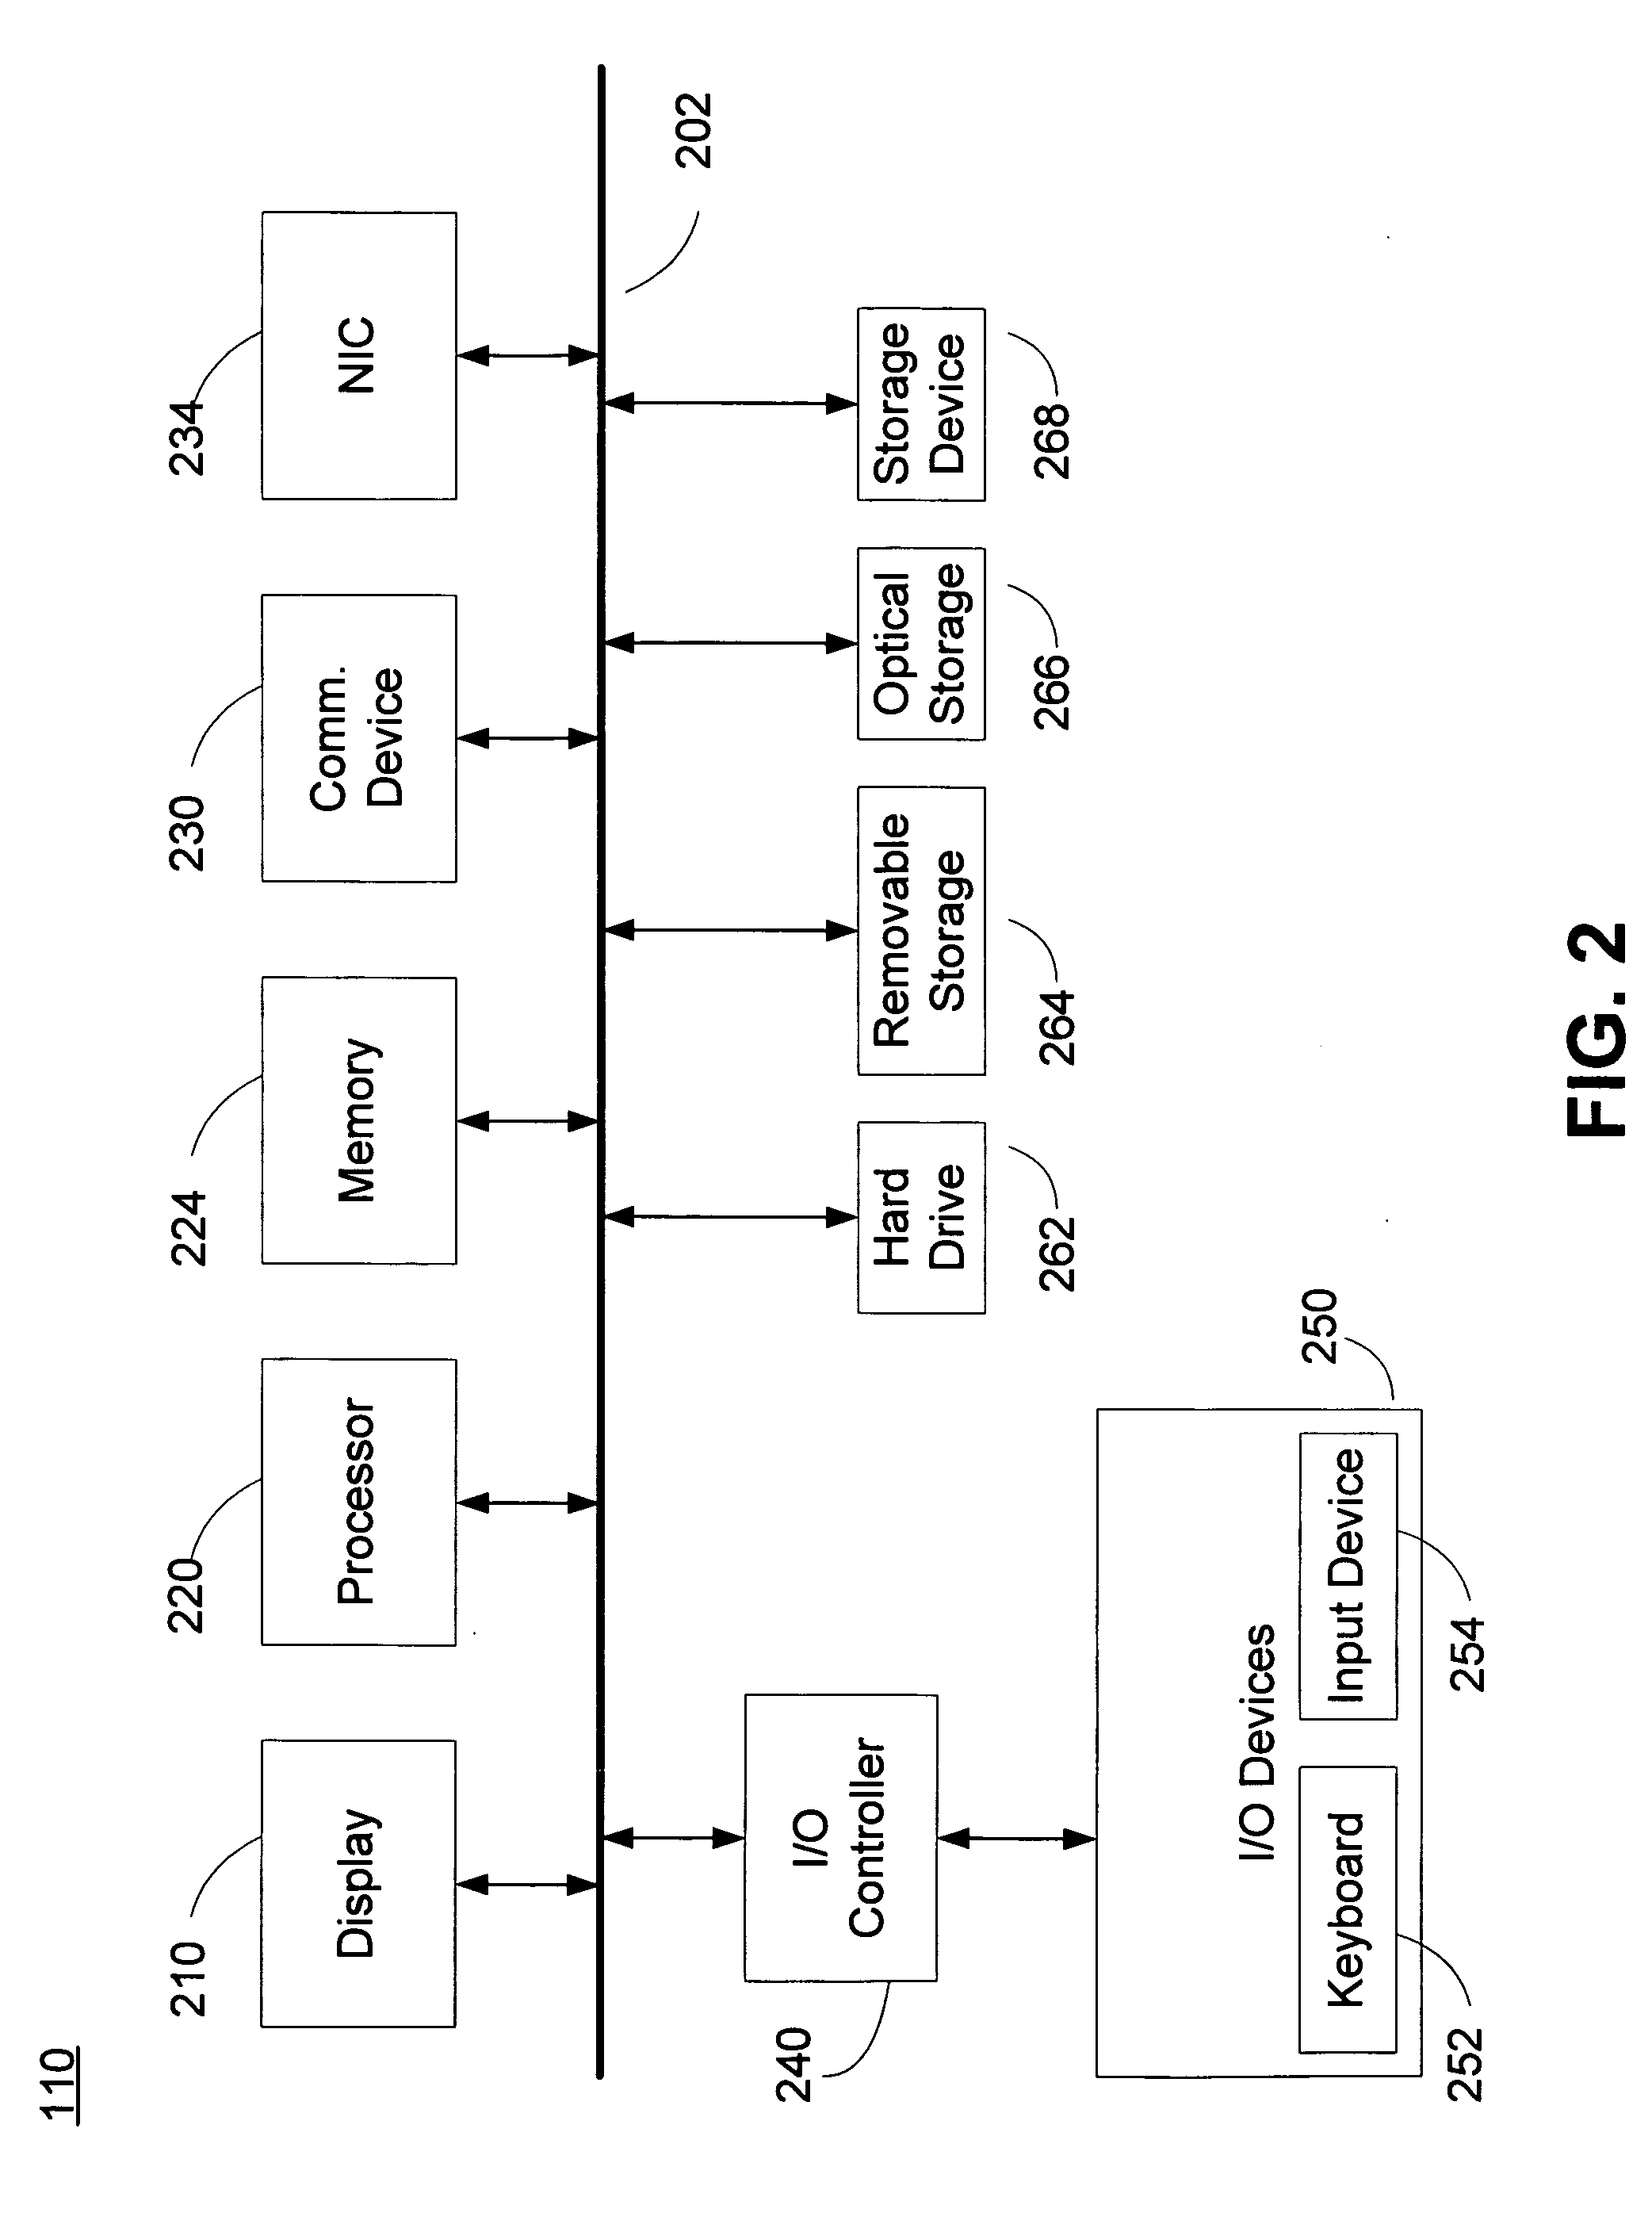 Commercial market determination and forecasting system and method